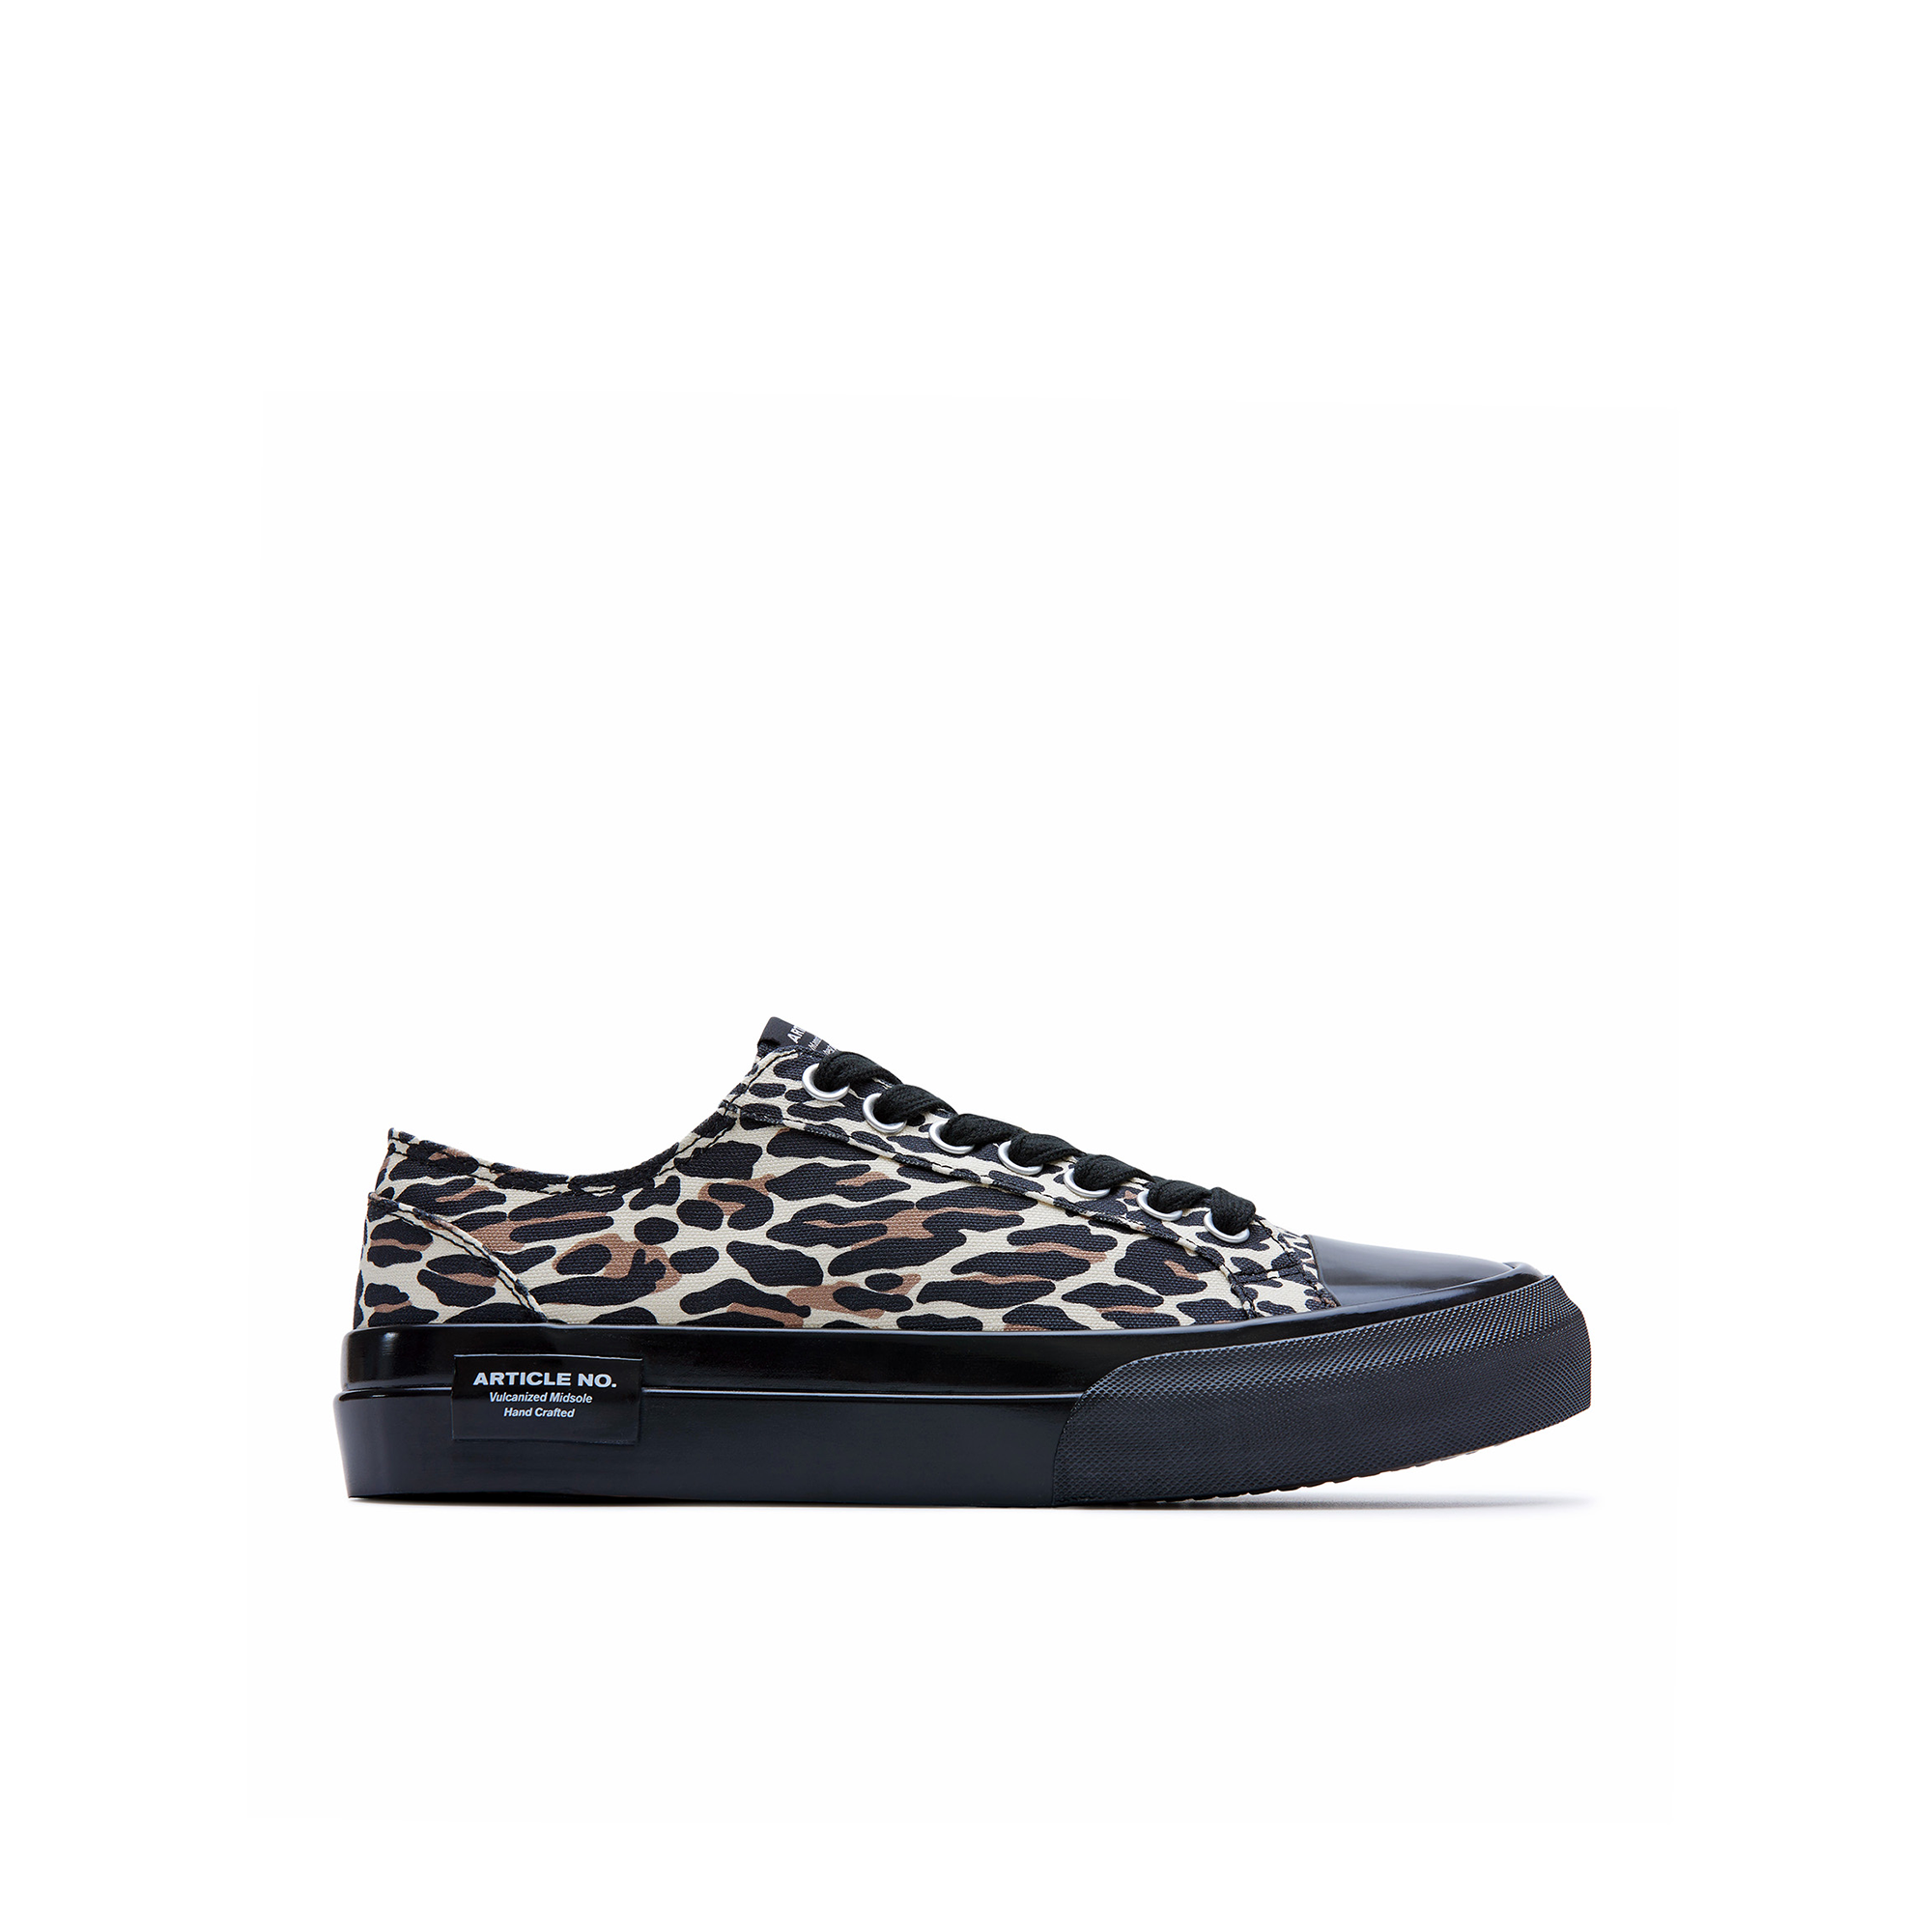 ARTICLE NO. 1007-S8016 BLACK SIDE TAG LEOPARD LOW-TOP VULCANIZED